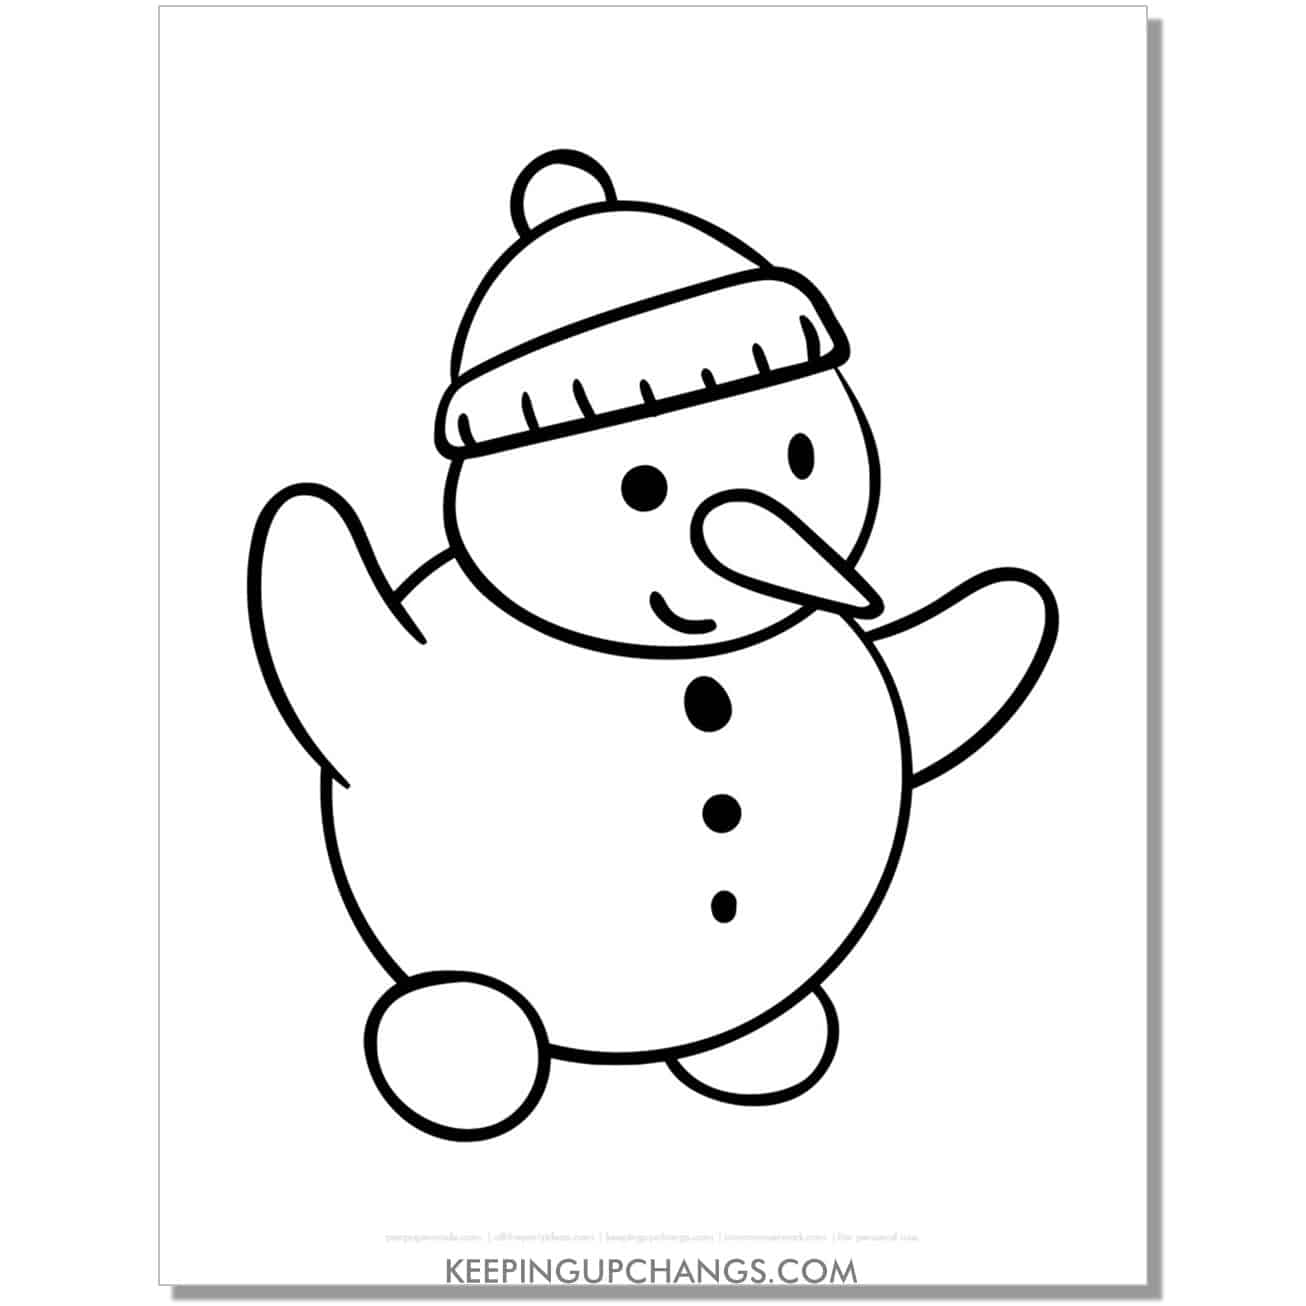 free snowman with arms, beanie coloring page.